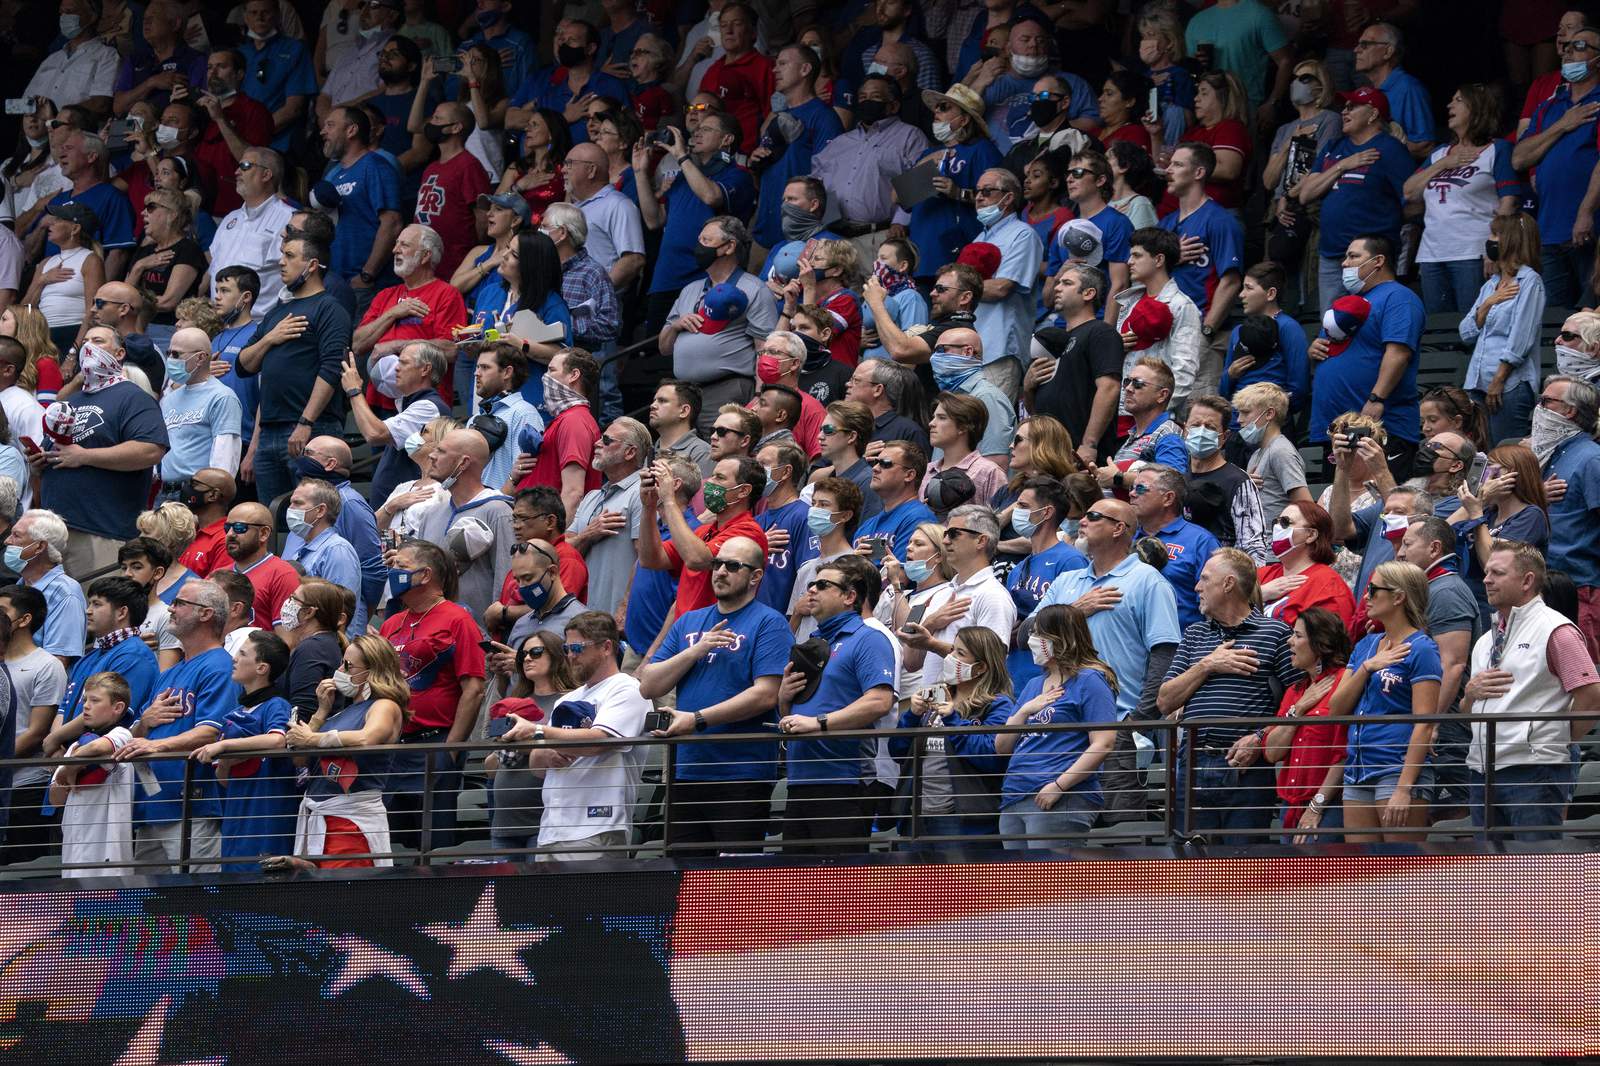 Rangers fill stands with fans, who accept 'calculated risk'